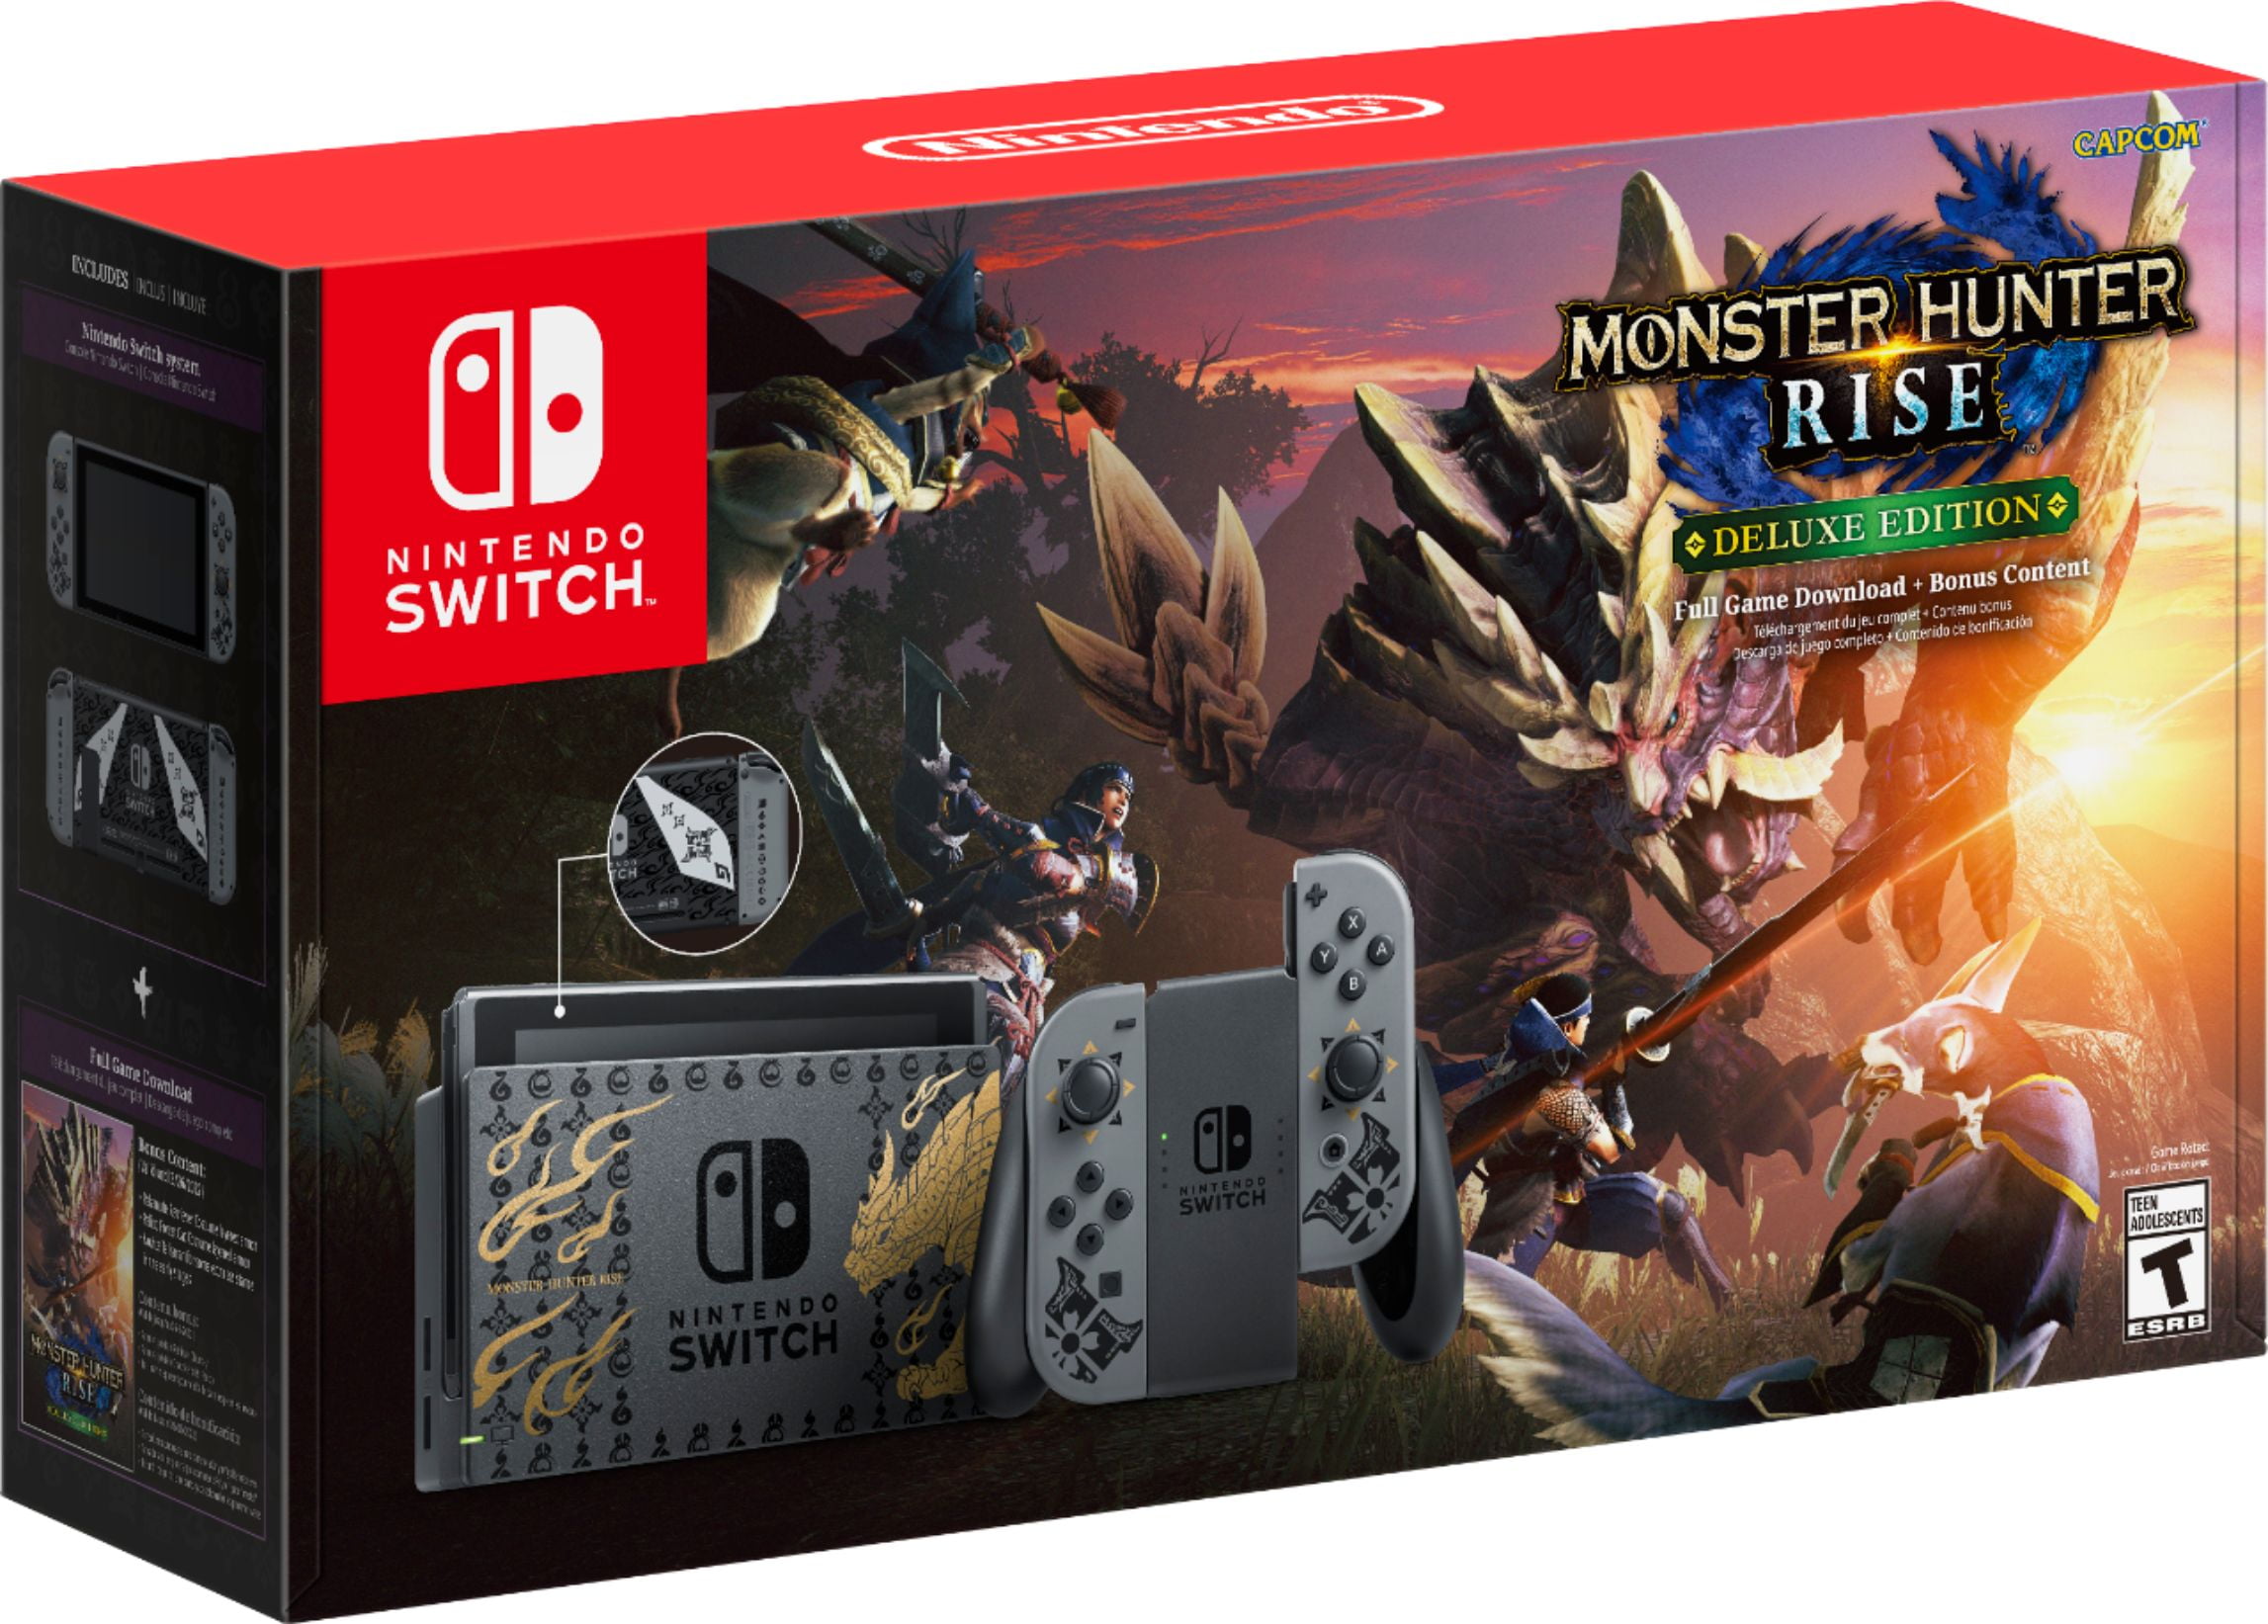 Gray Nintendo - Switch HUNTER Edition System RISE MONSTER Deluxe